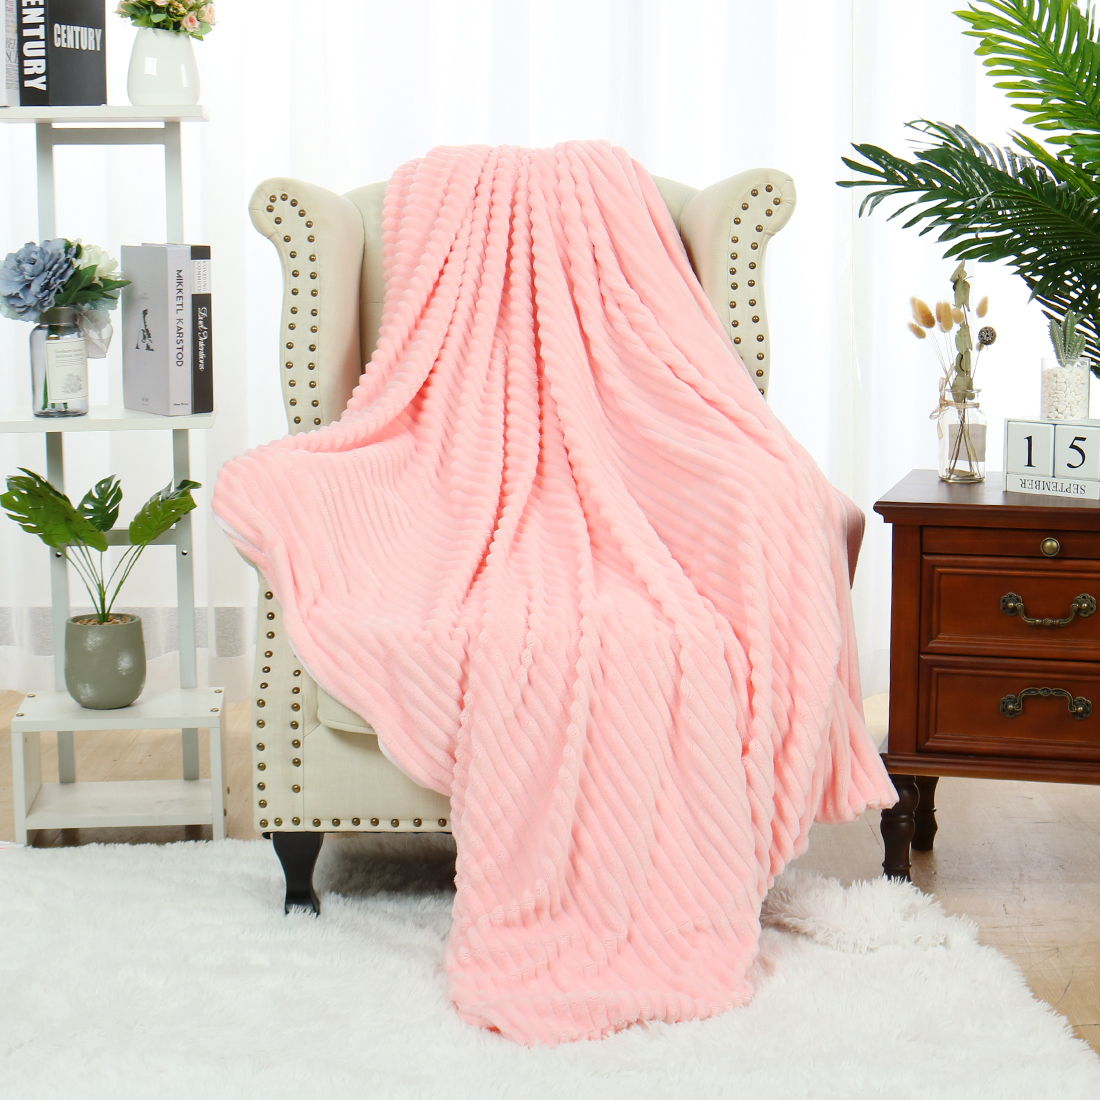 Unique Bargains Flannel Fleece Throw Blanket For Sofa Bed 50 x 60 Pink 